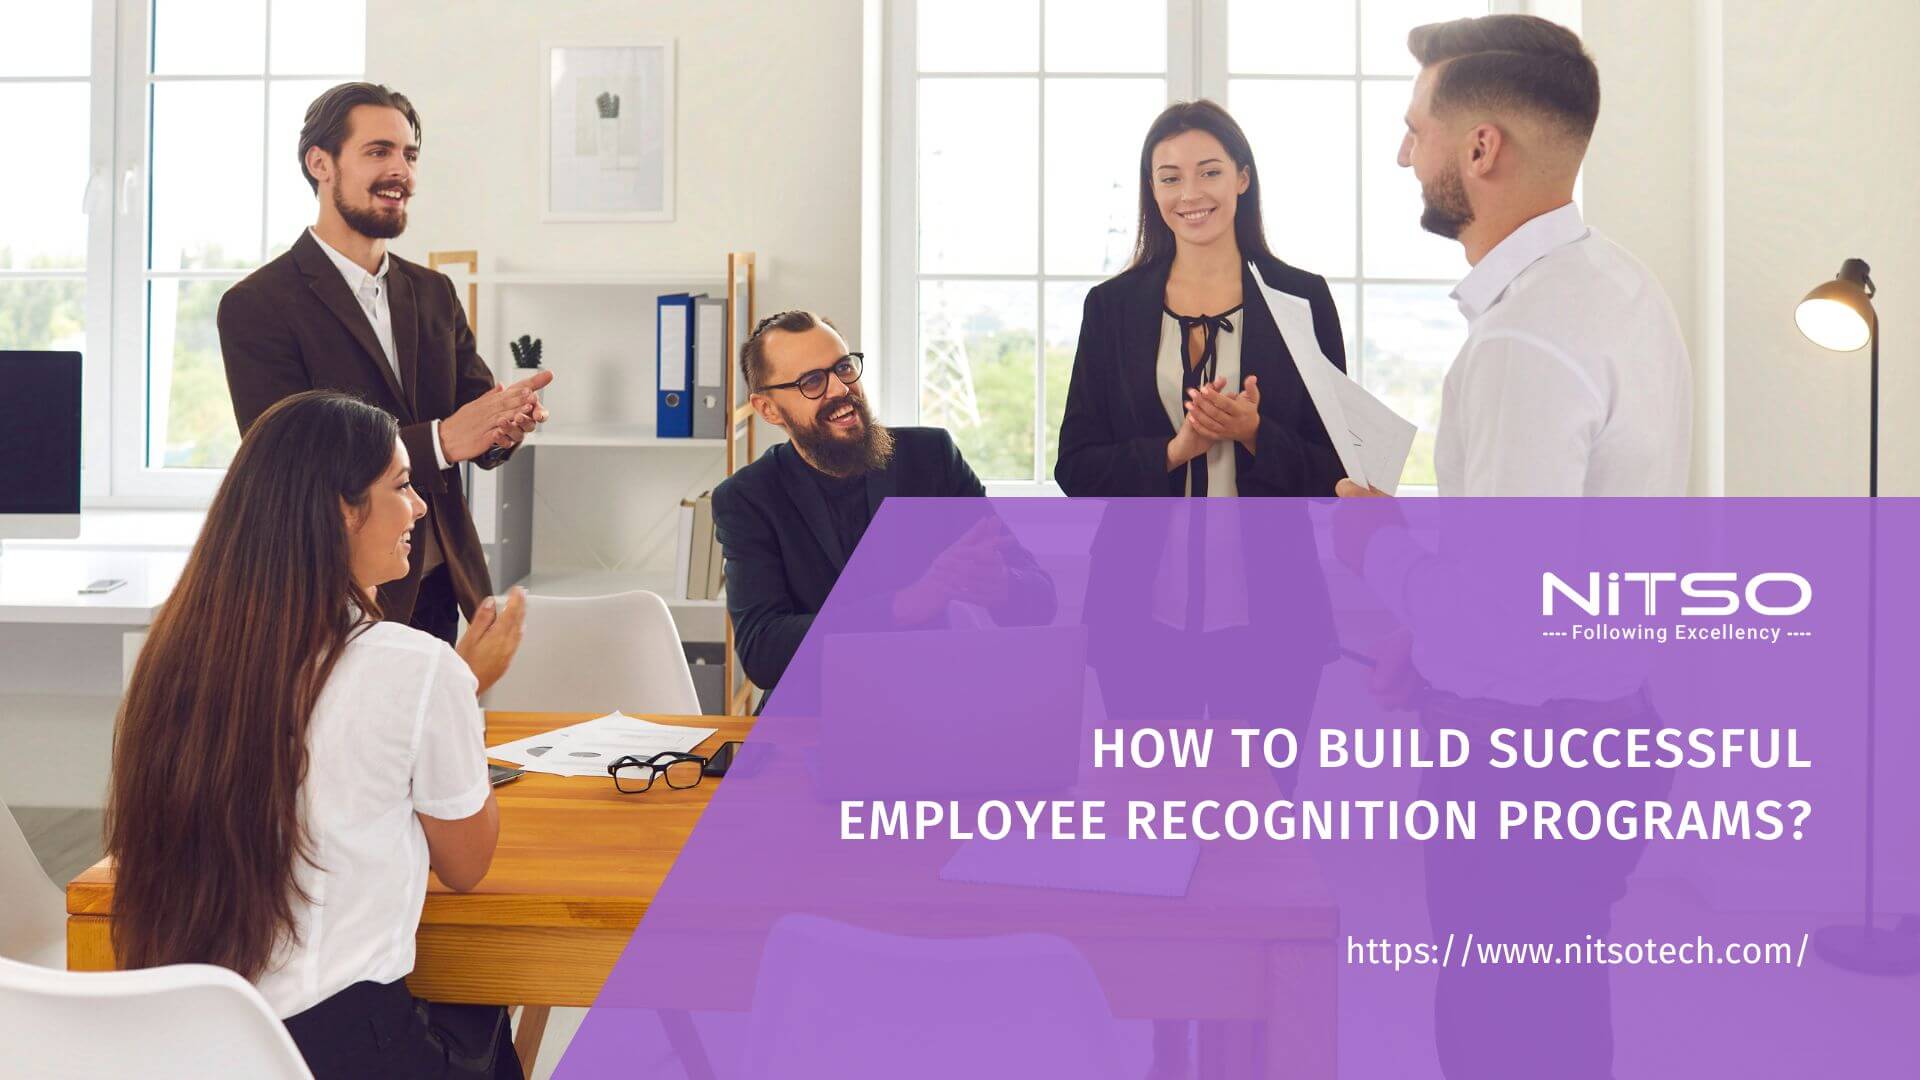 What Makes an Employee Recognition Program Successful?